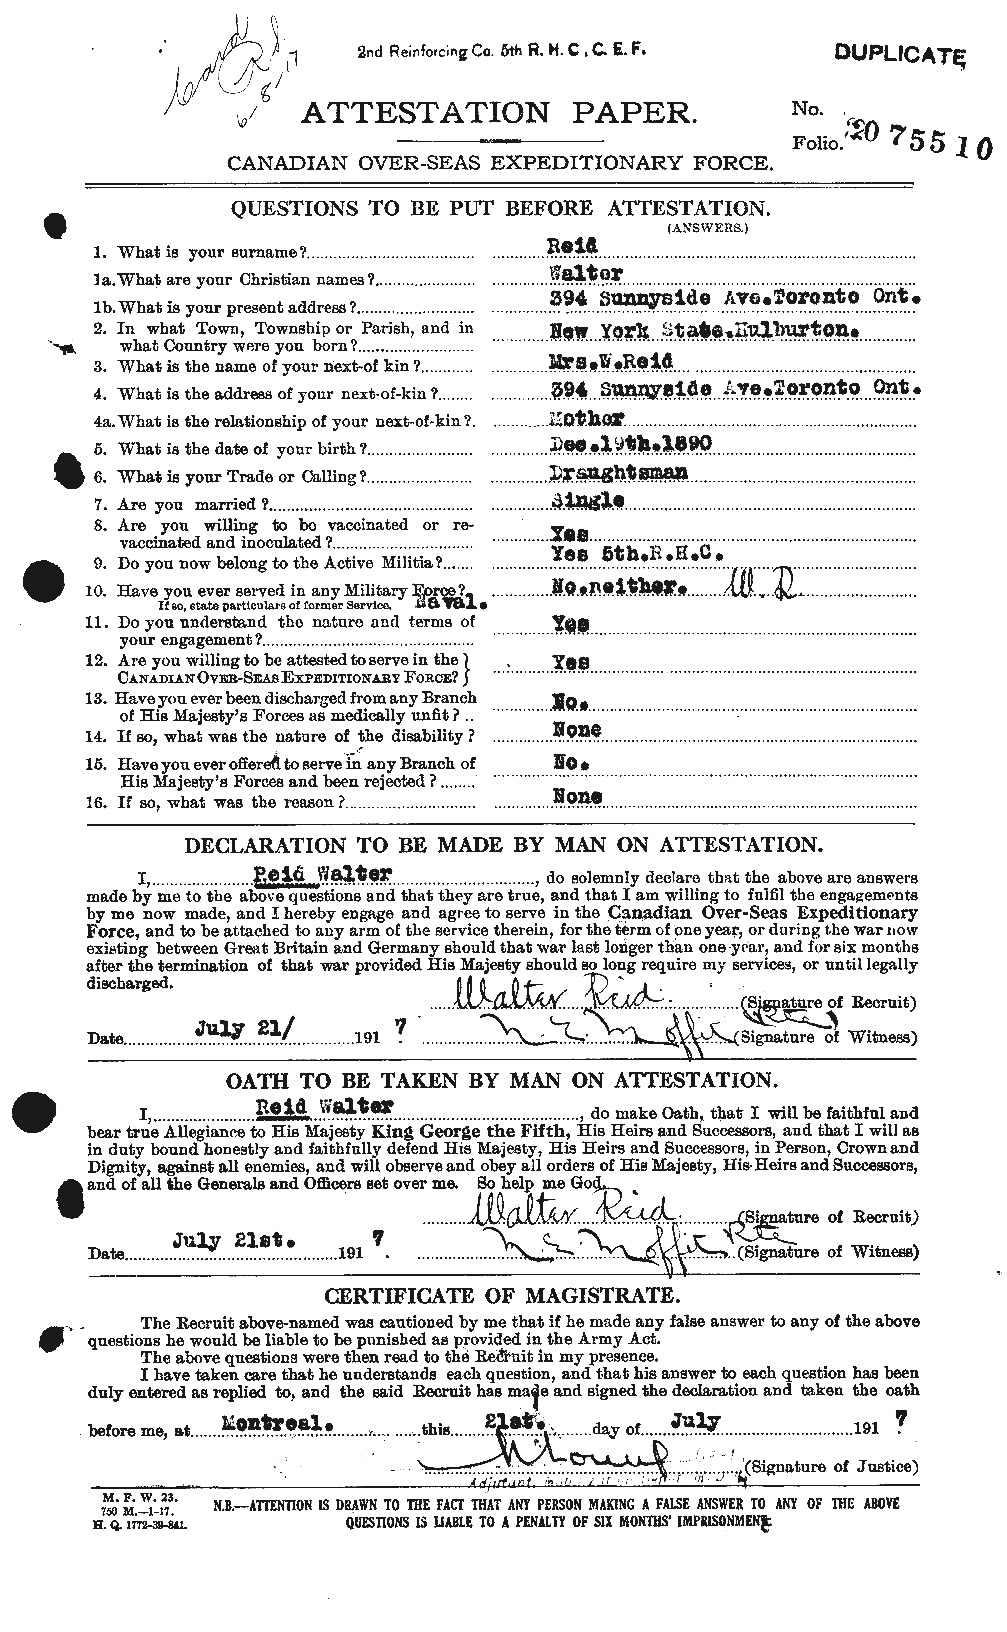 Personnel Records of the First World War - CEF 596886a